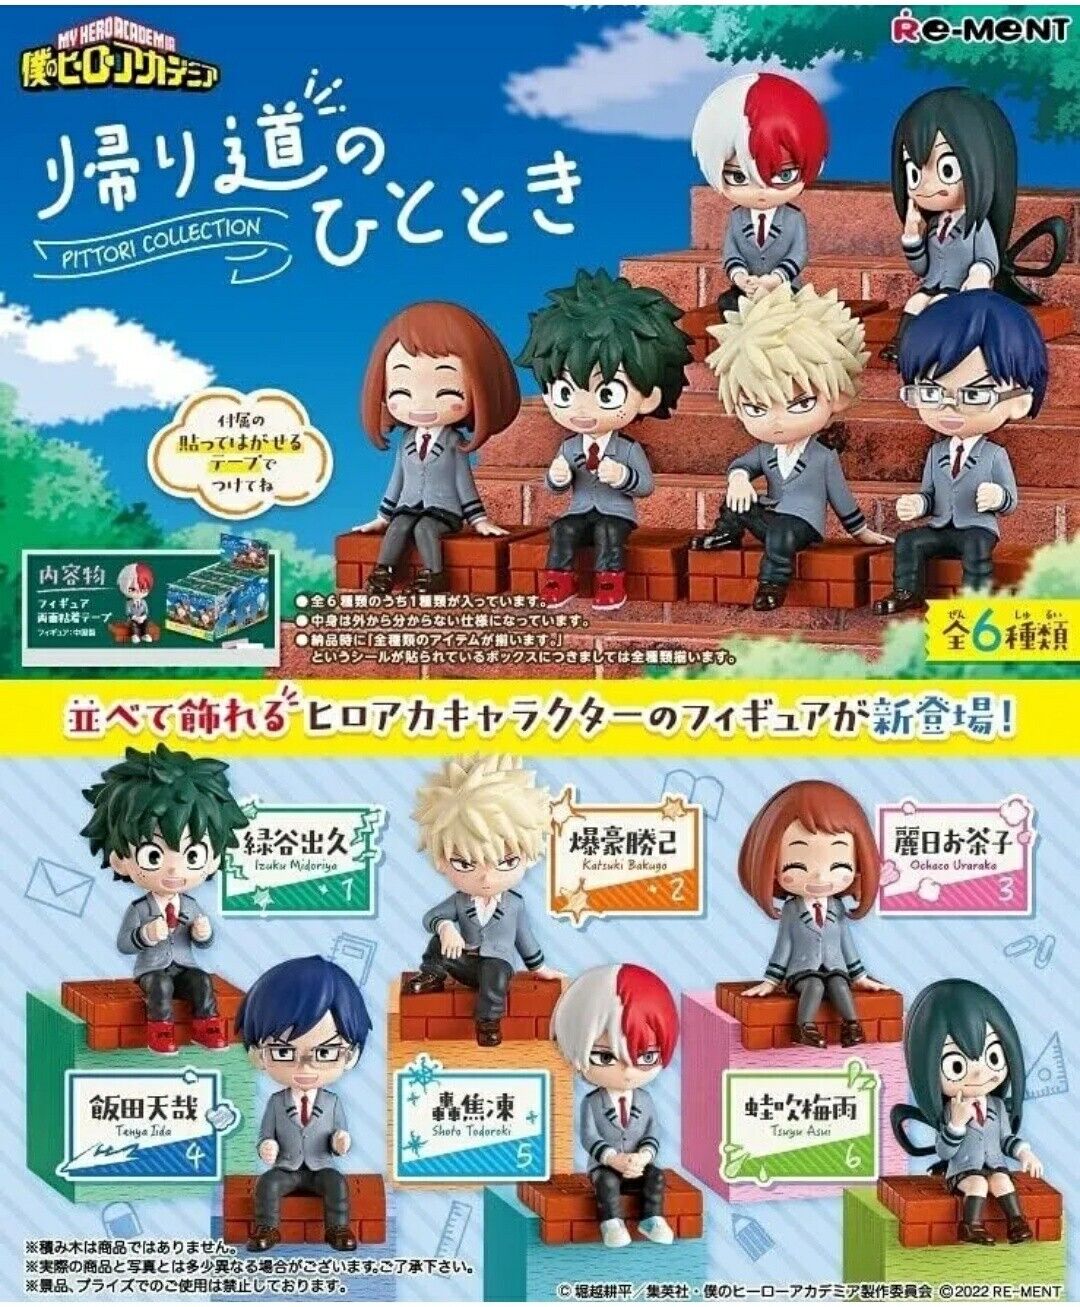 RE-MENT My Hero Academia Pittori Collection Full Case Of 6 Sealed Blind Box